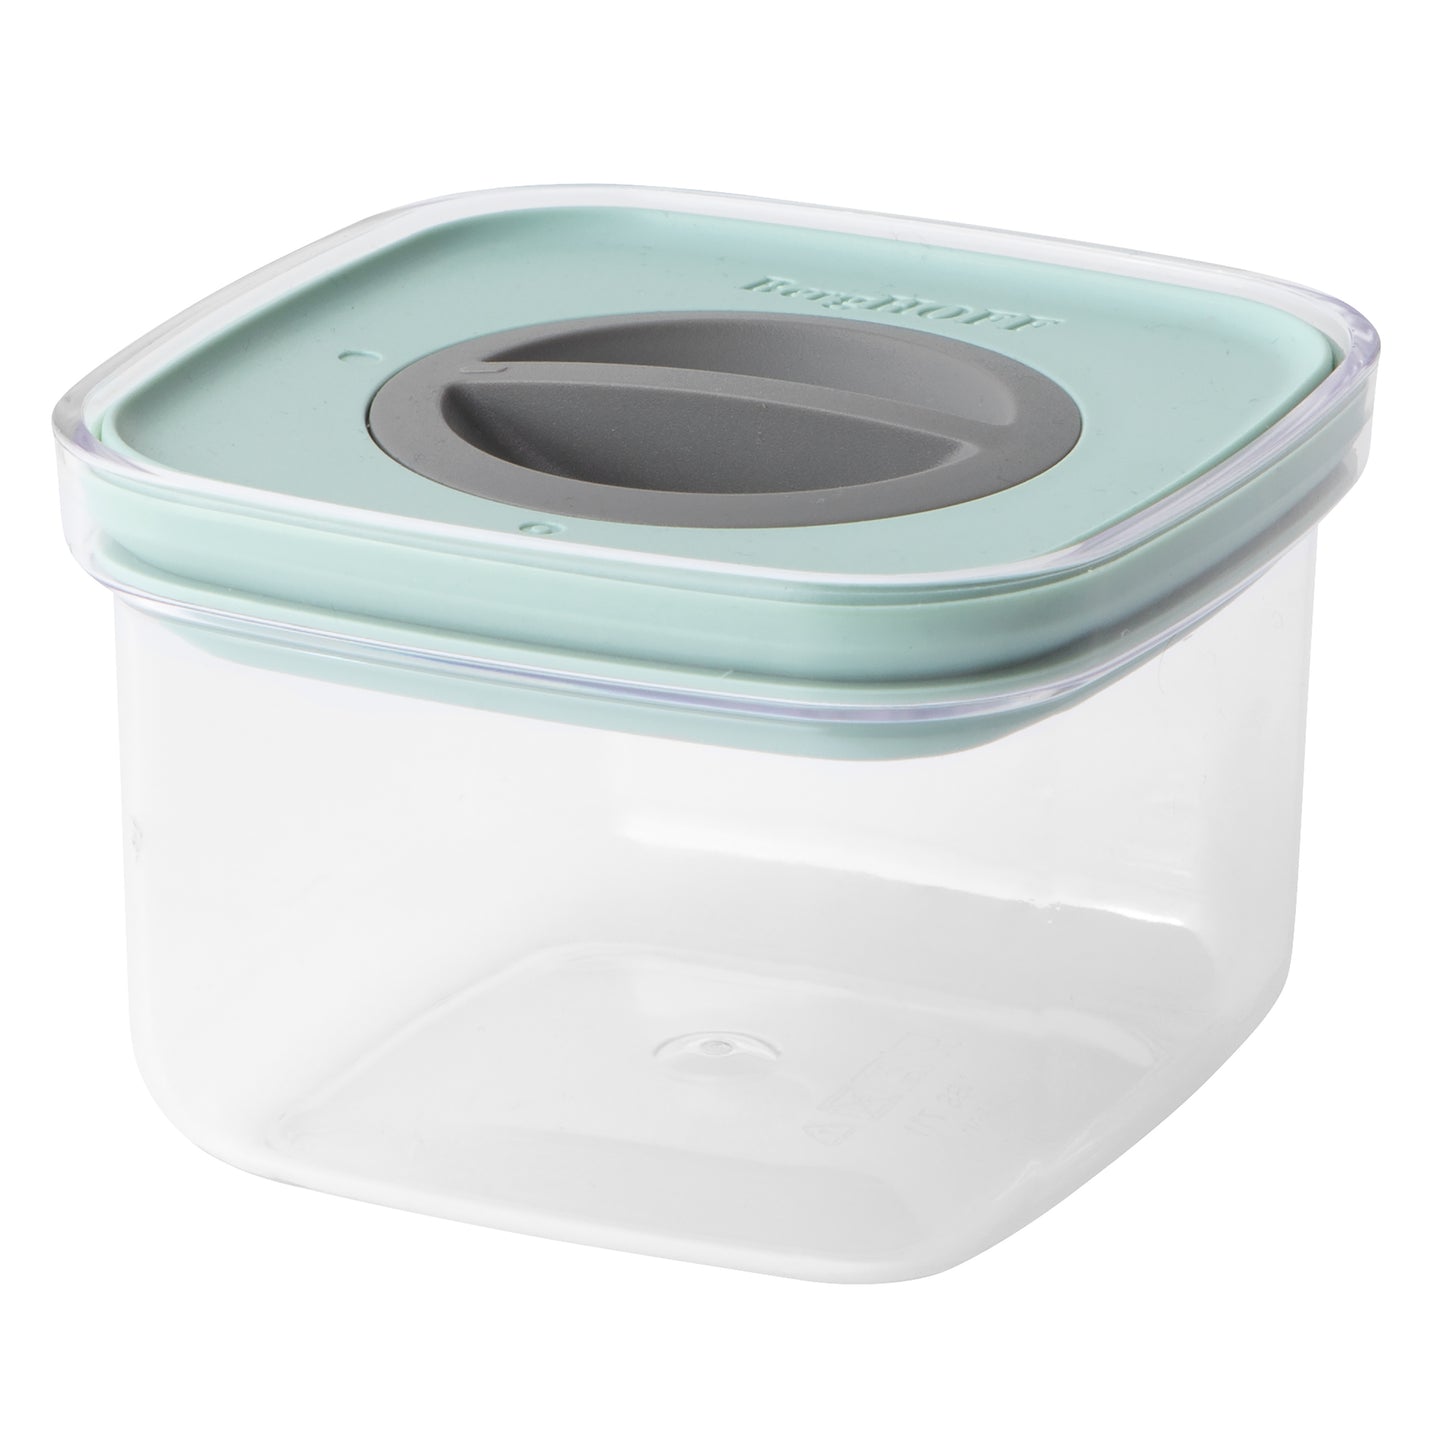 BergHOFF Leo Smart Seal Food Container, Green